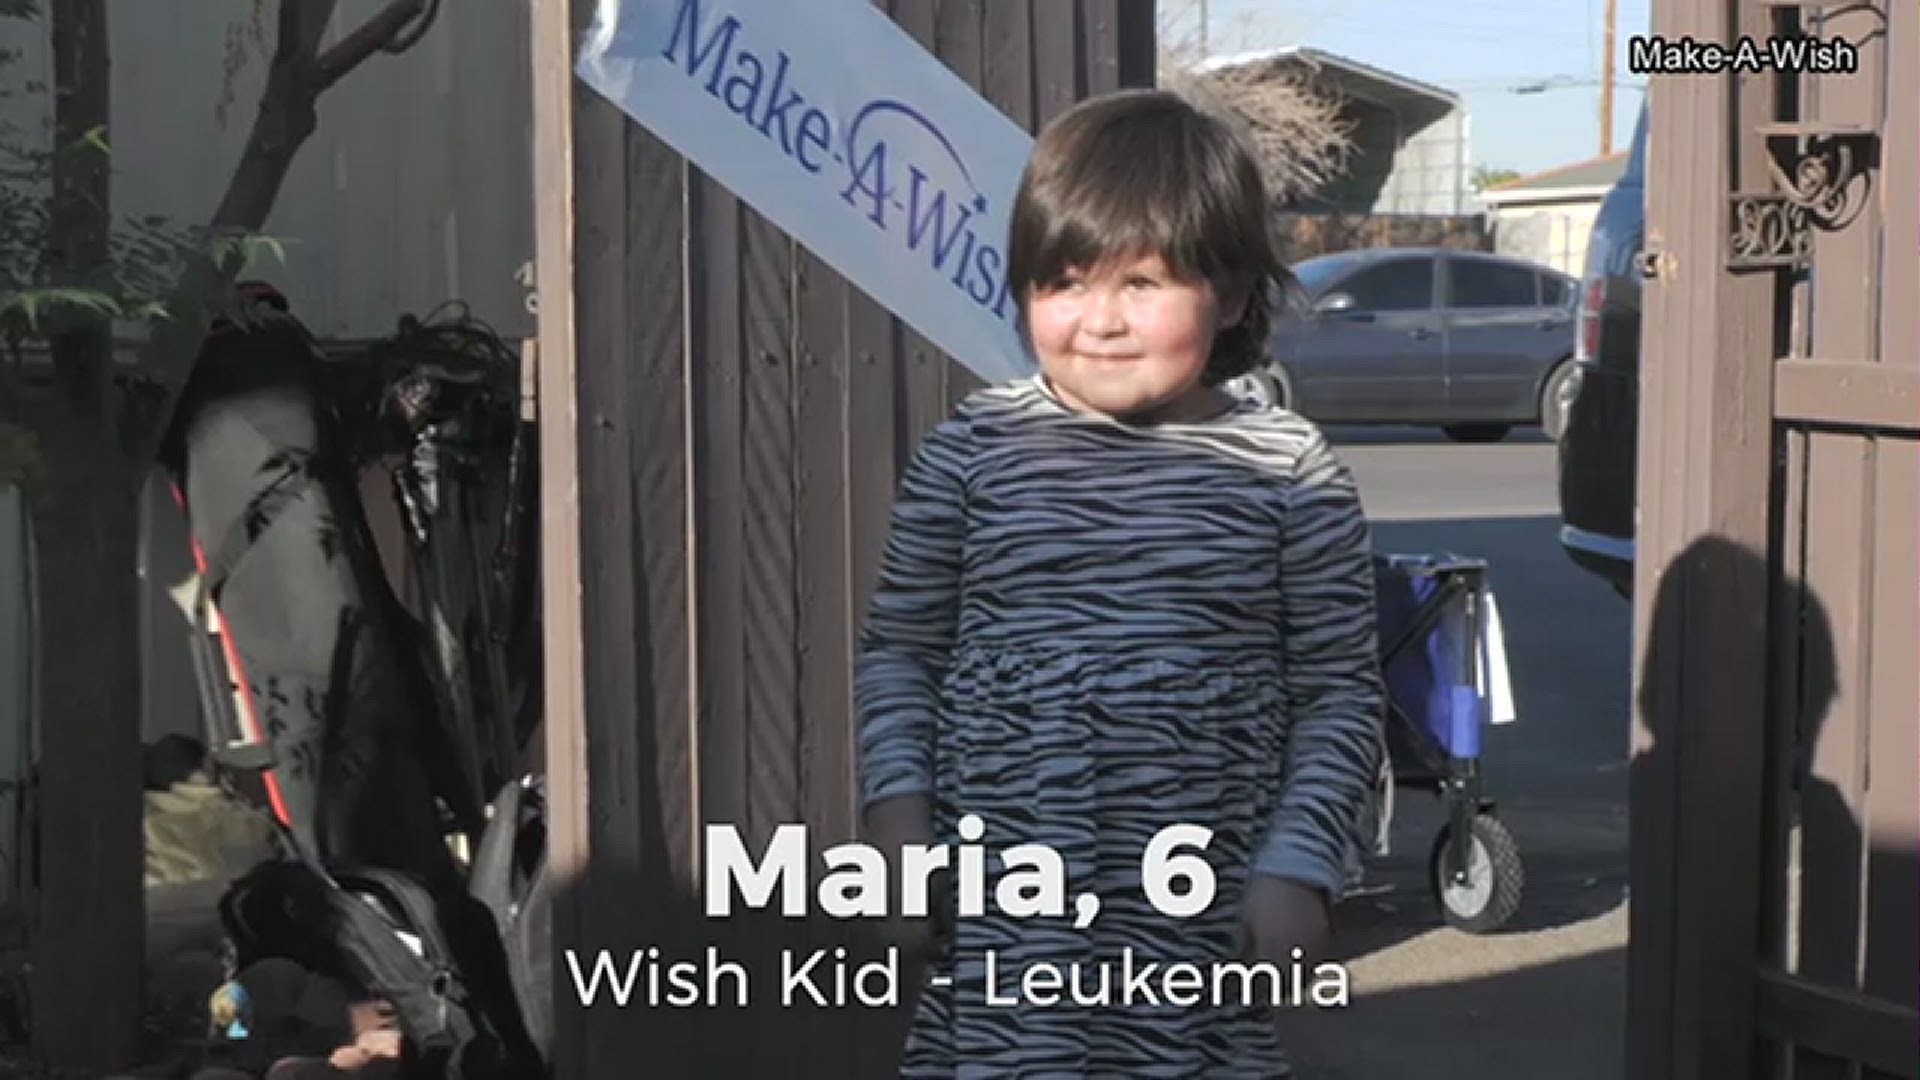 The 6-year-old wanted to become a princess and her wish was granted by Make-A-Wish Arizona, but she got another surprise that she loved.